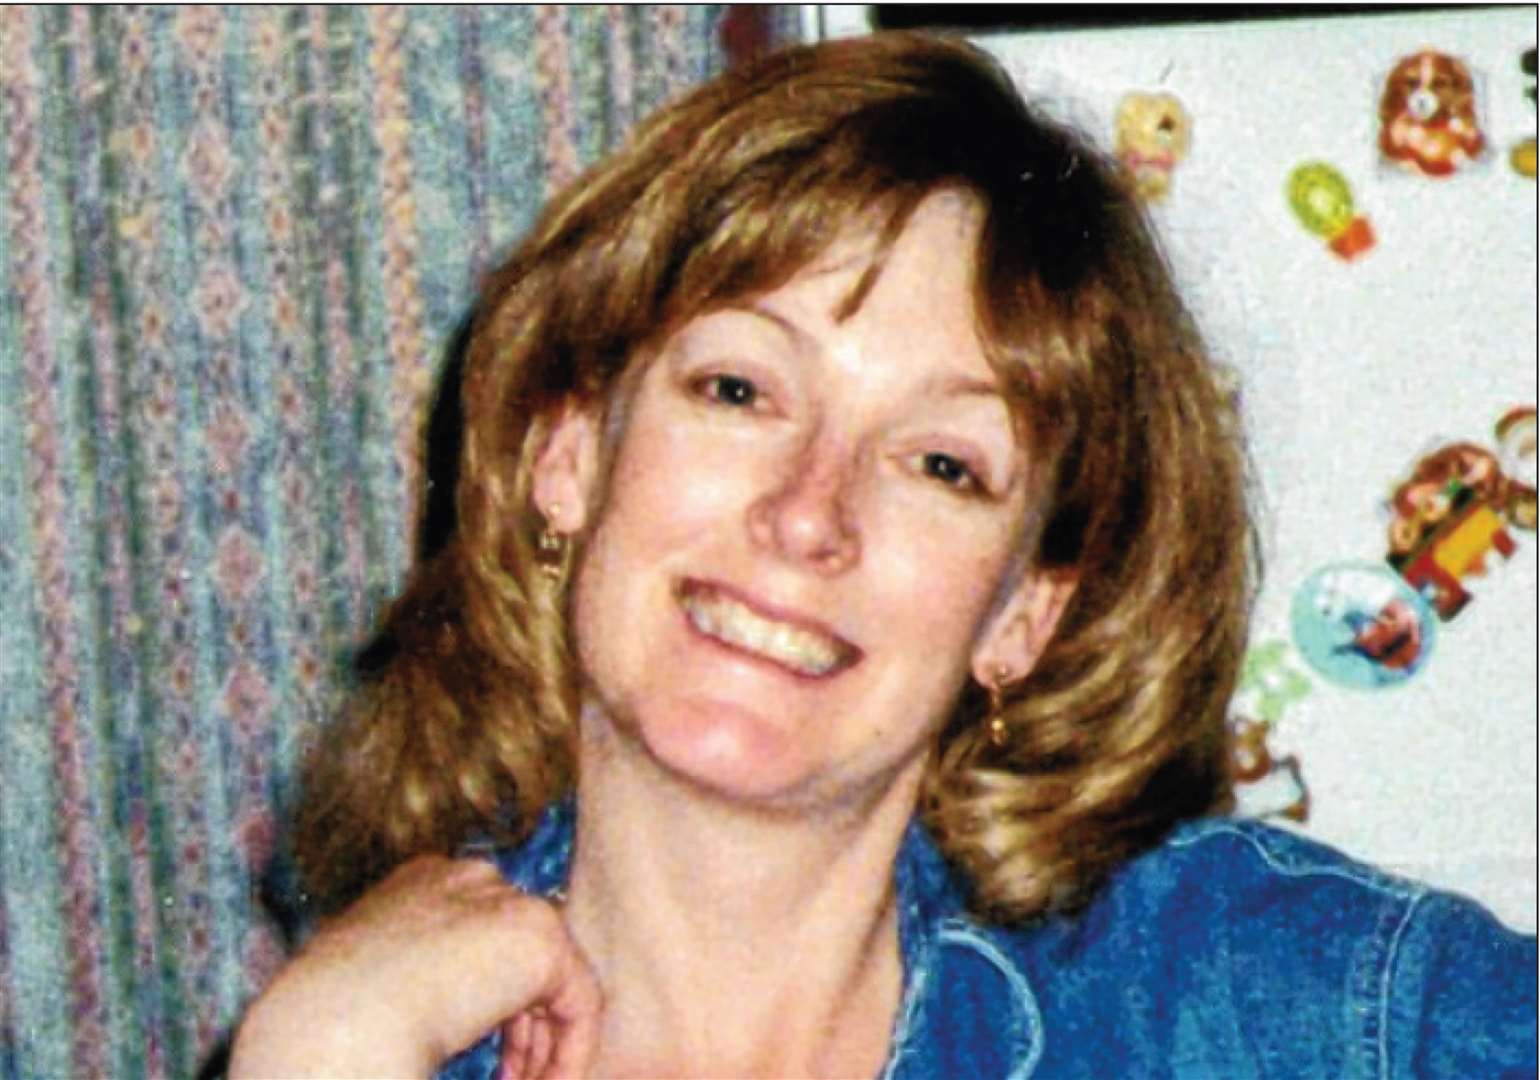 Arlene Fraser disappeared in April 1998 - husband Nat Fraser has twice been convicted of her murder.